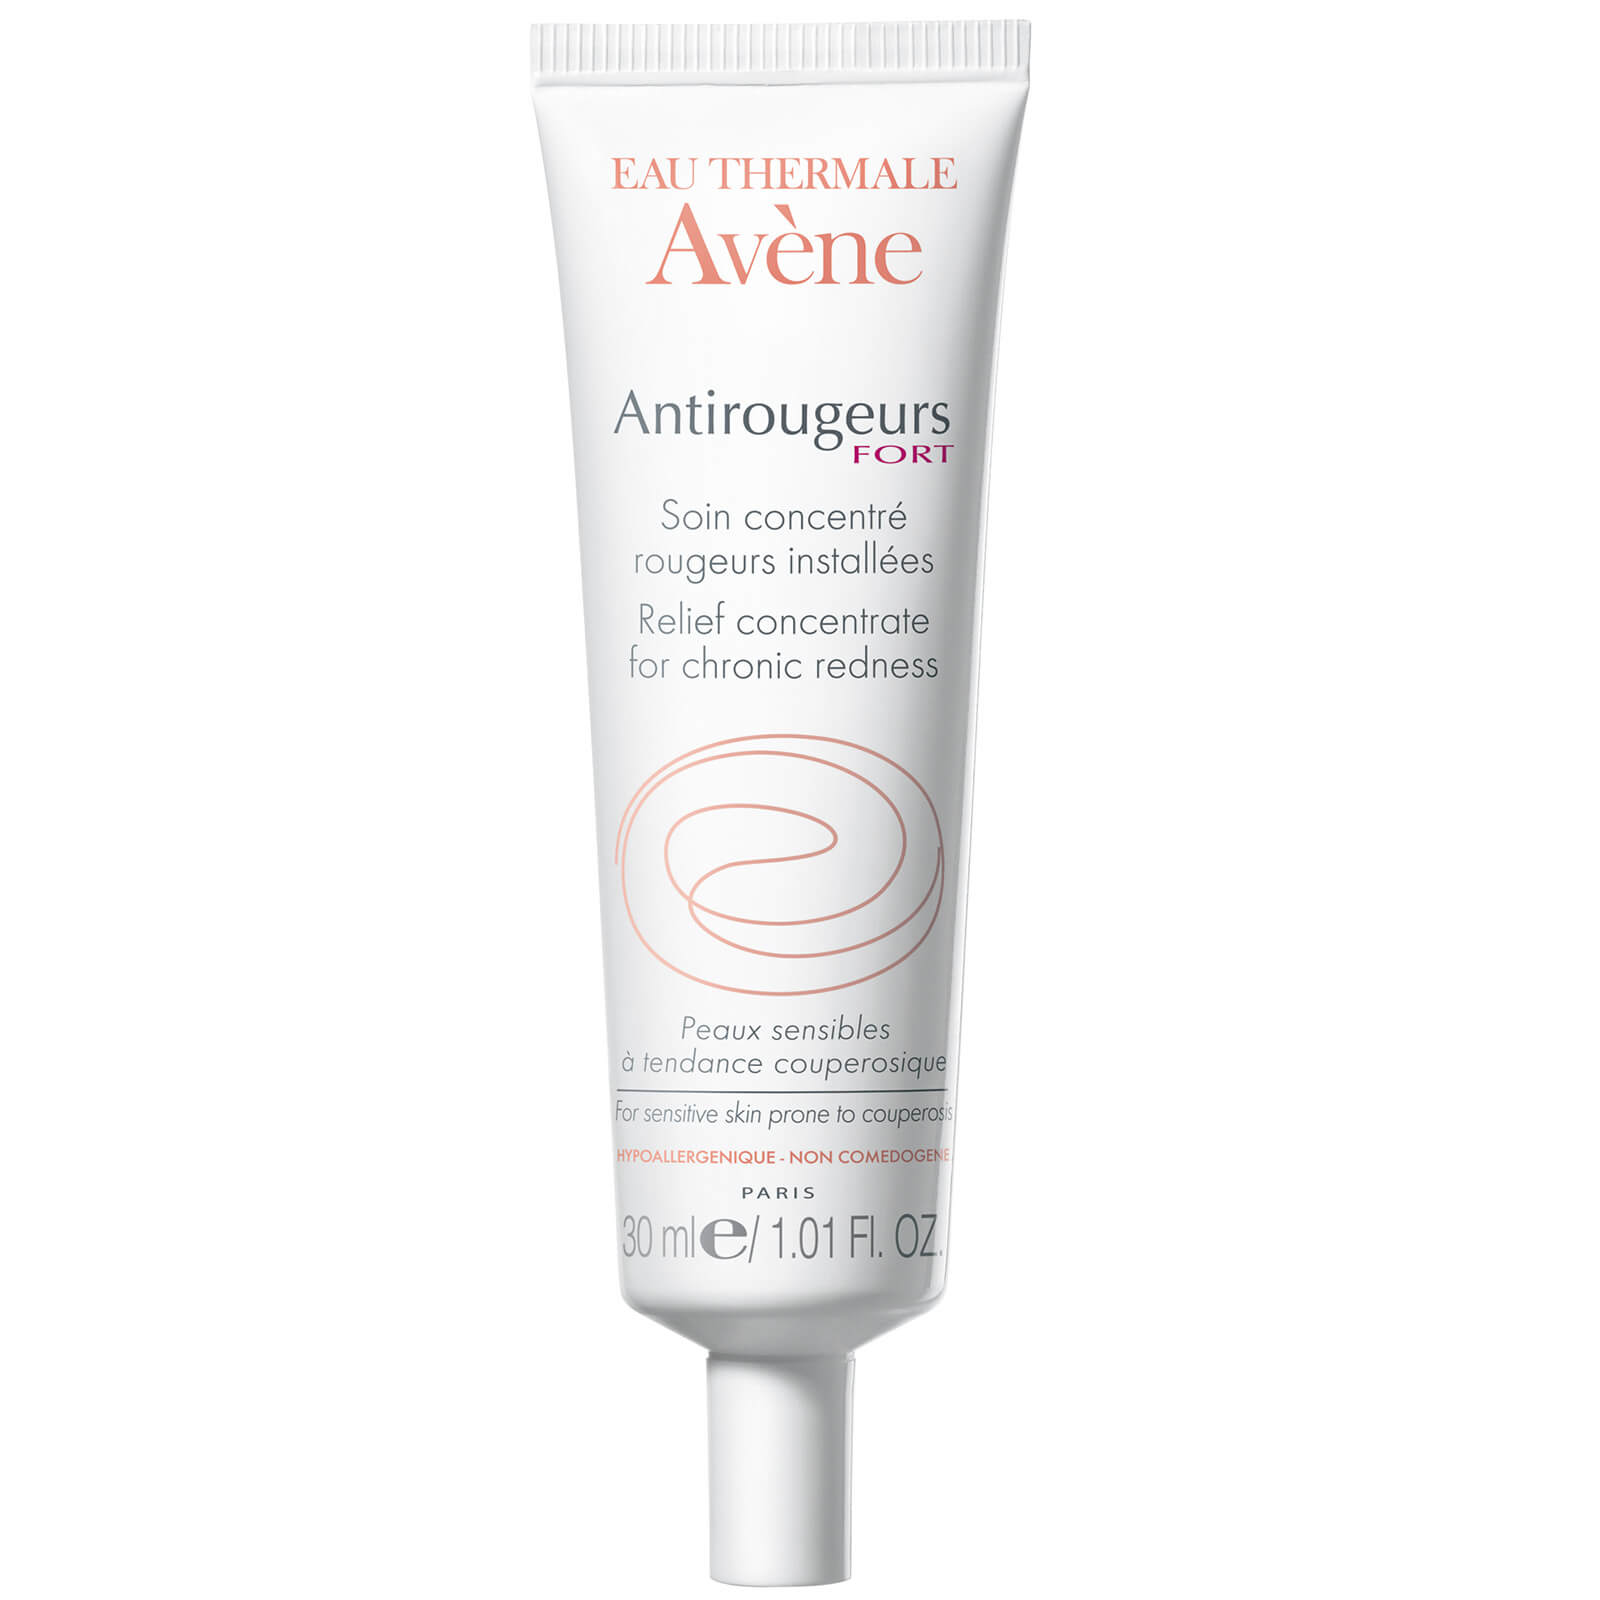 Avene Antirougeurs Fort Relief Concentrate (1.01 Fl. Oz.)